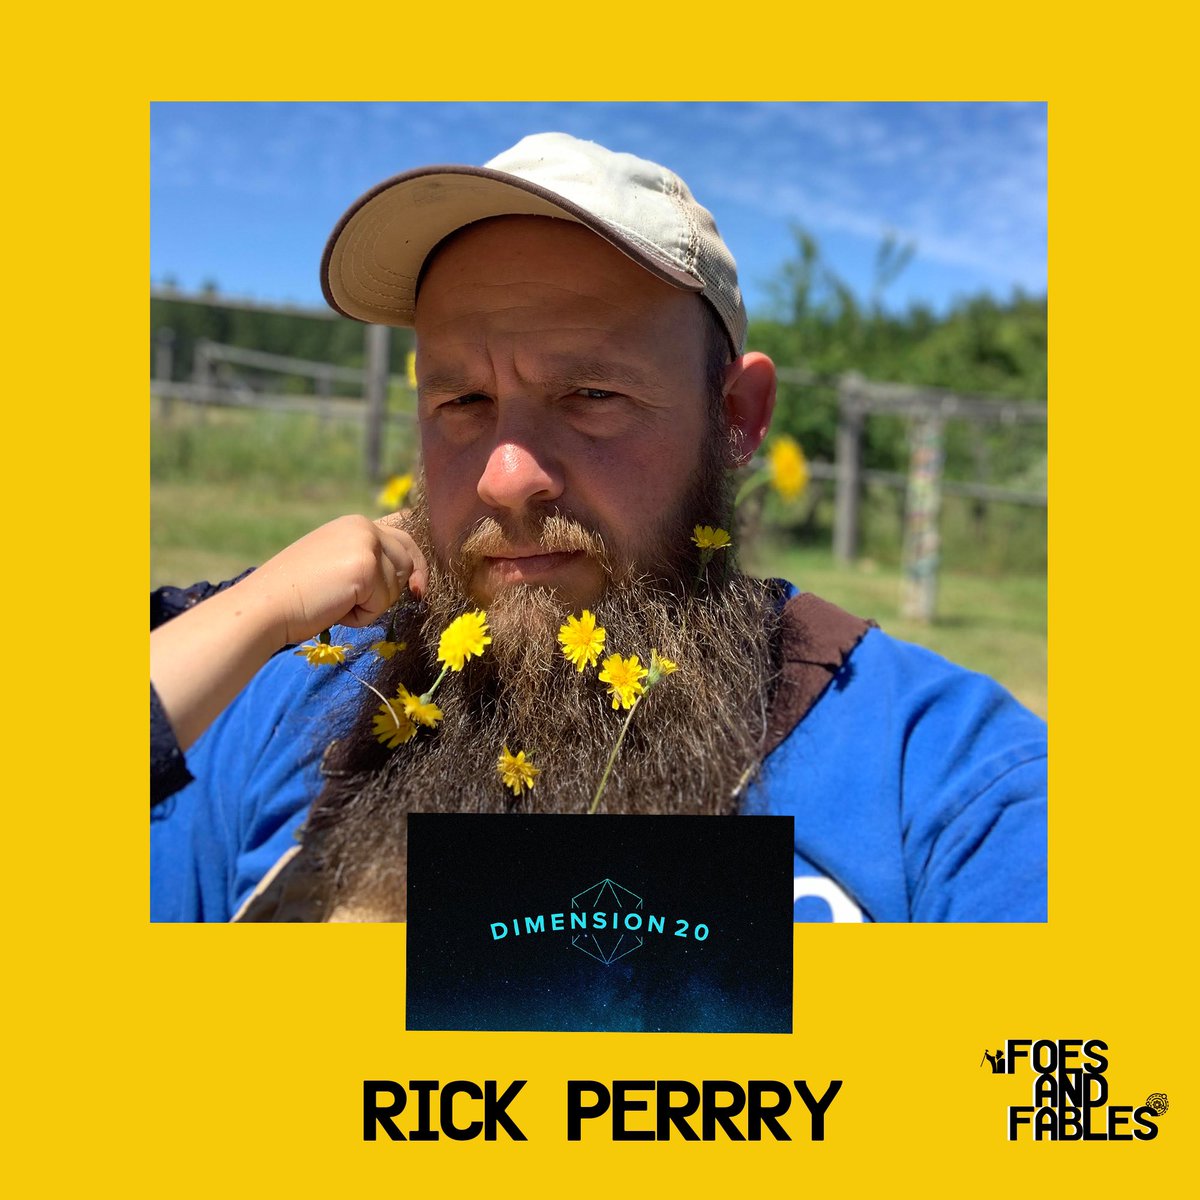 OUR INTERVIEW WITH THE INCREDIBLE @RichardHPerry of @dimension20show IS UP IN OUR FEED! link in bio :) thank you Rick for the fun chat!!! #dimension20 #rickperry #dndpodcast #dnd #dungeonsanddragons #actualplayshow